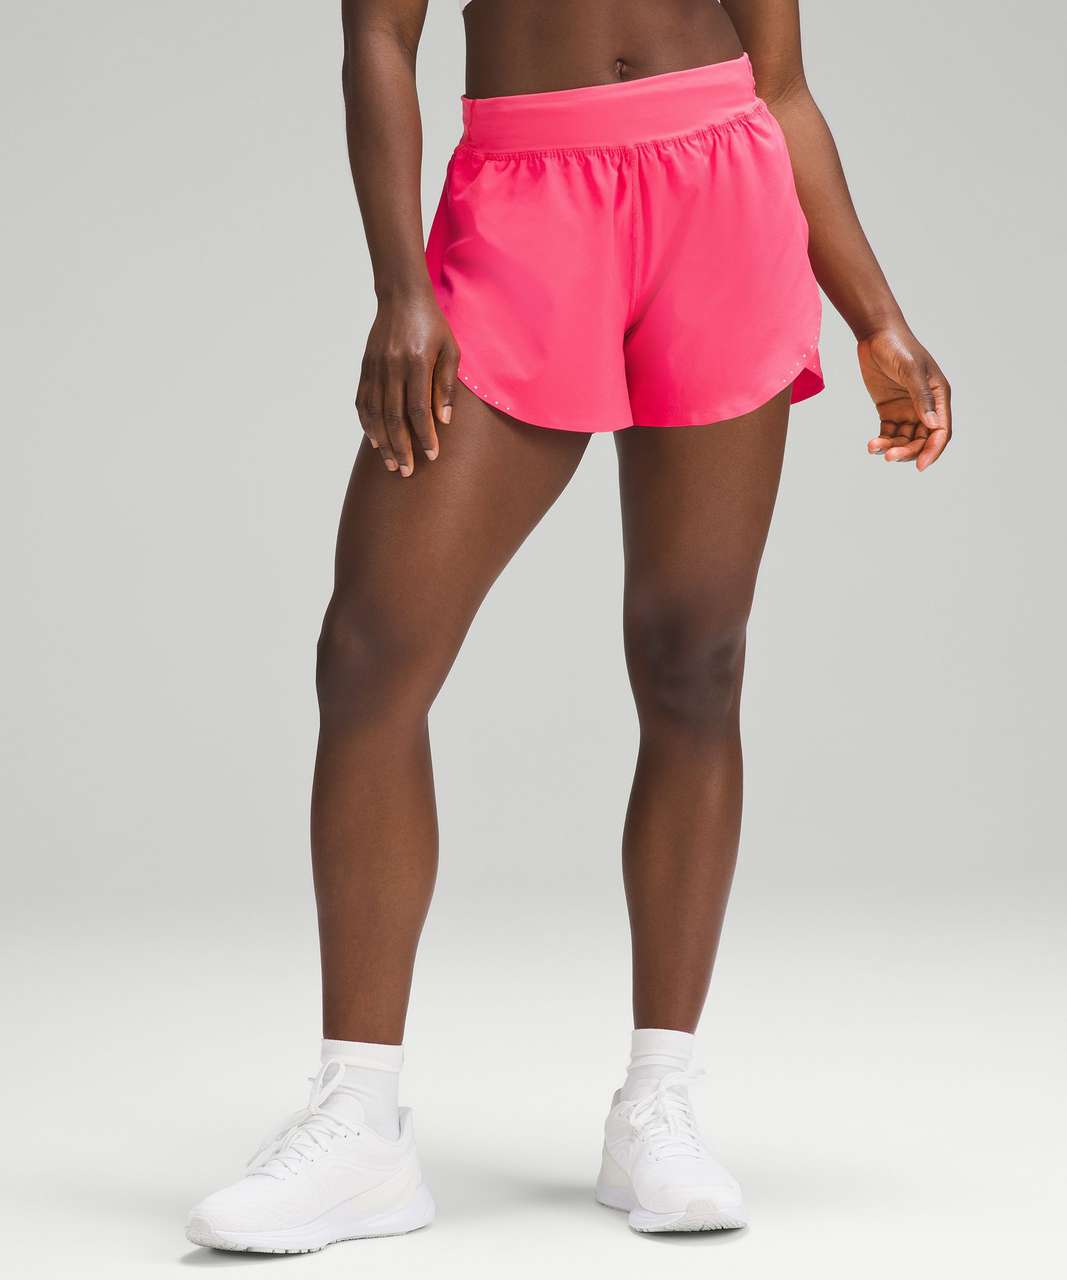 Lululemon Fast and Free Reflective High-Rise Classic-Fit Short 3" - Lip Gloss